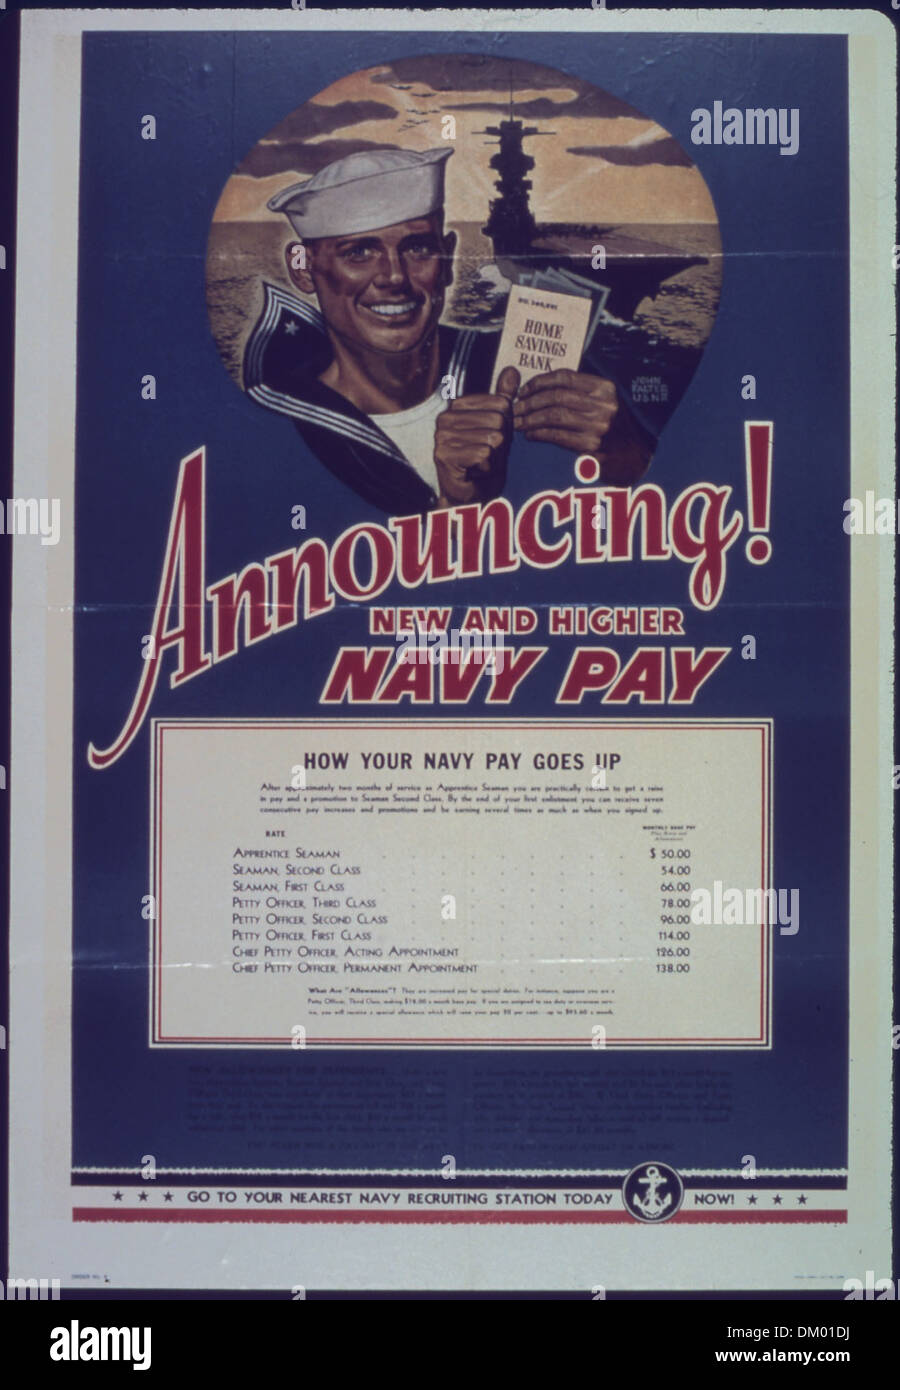 'Announcing new and higher navy pay' 513511 Stock Photo